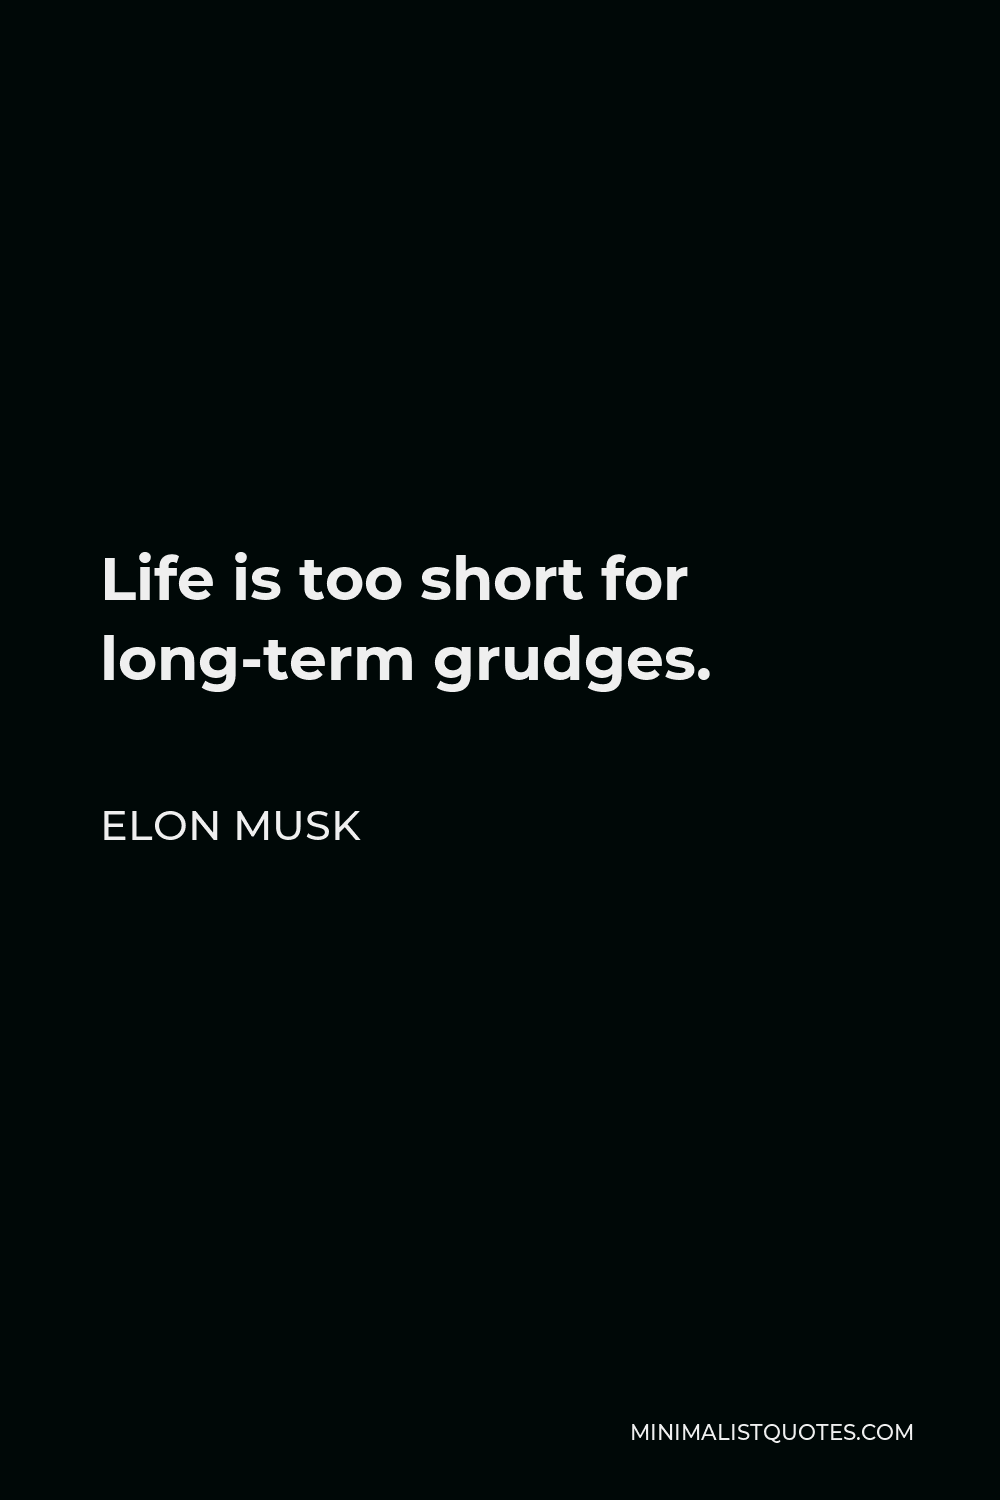 Elon Musk Quote - Life is too short for long-term grudges.